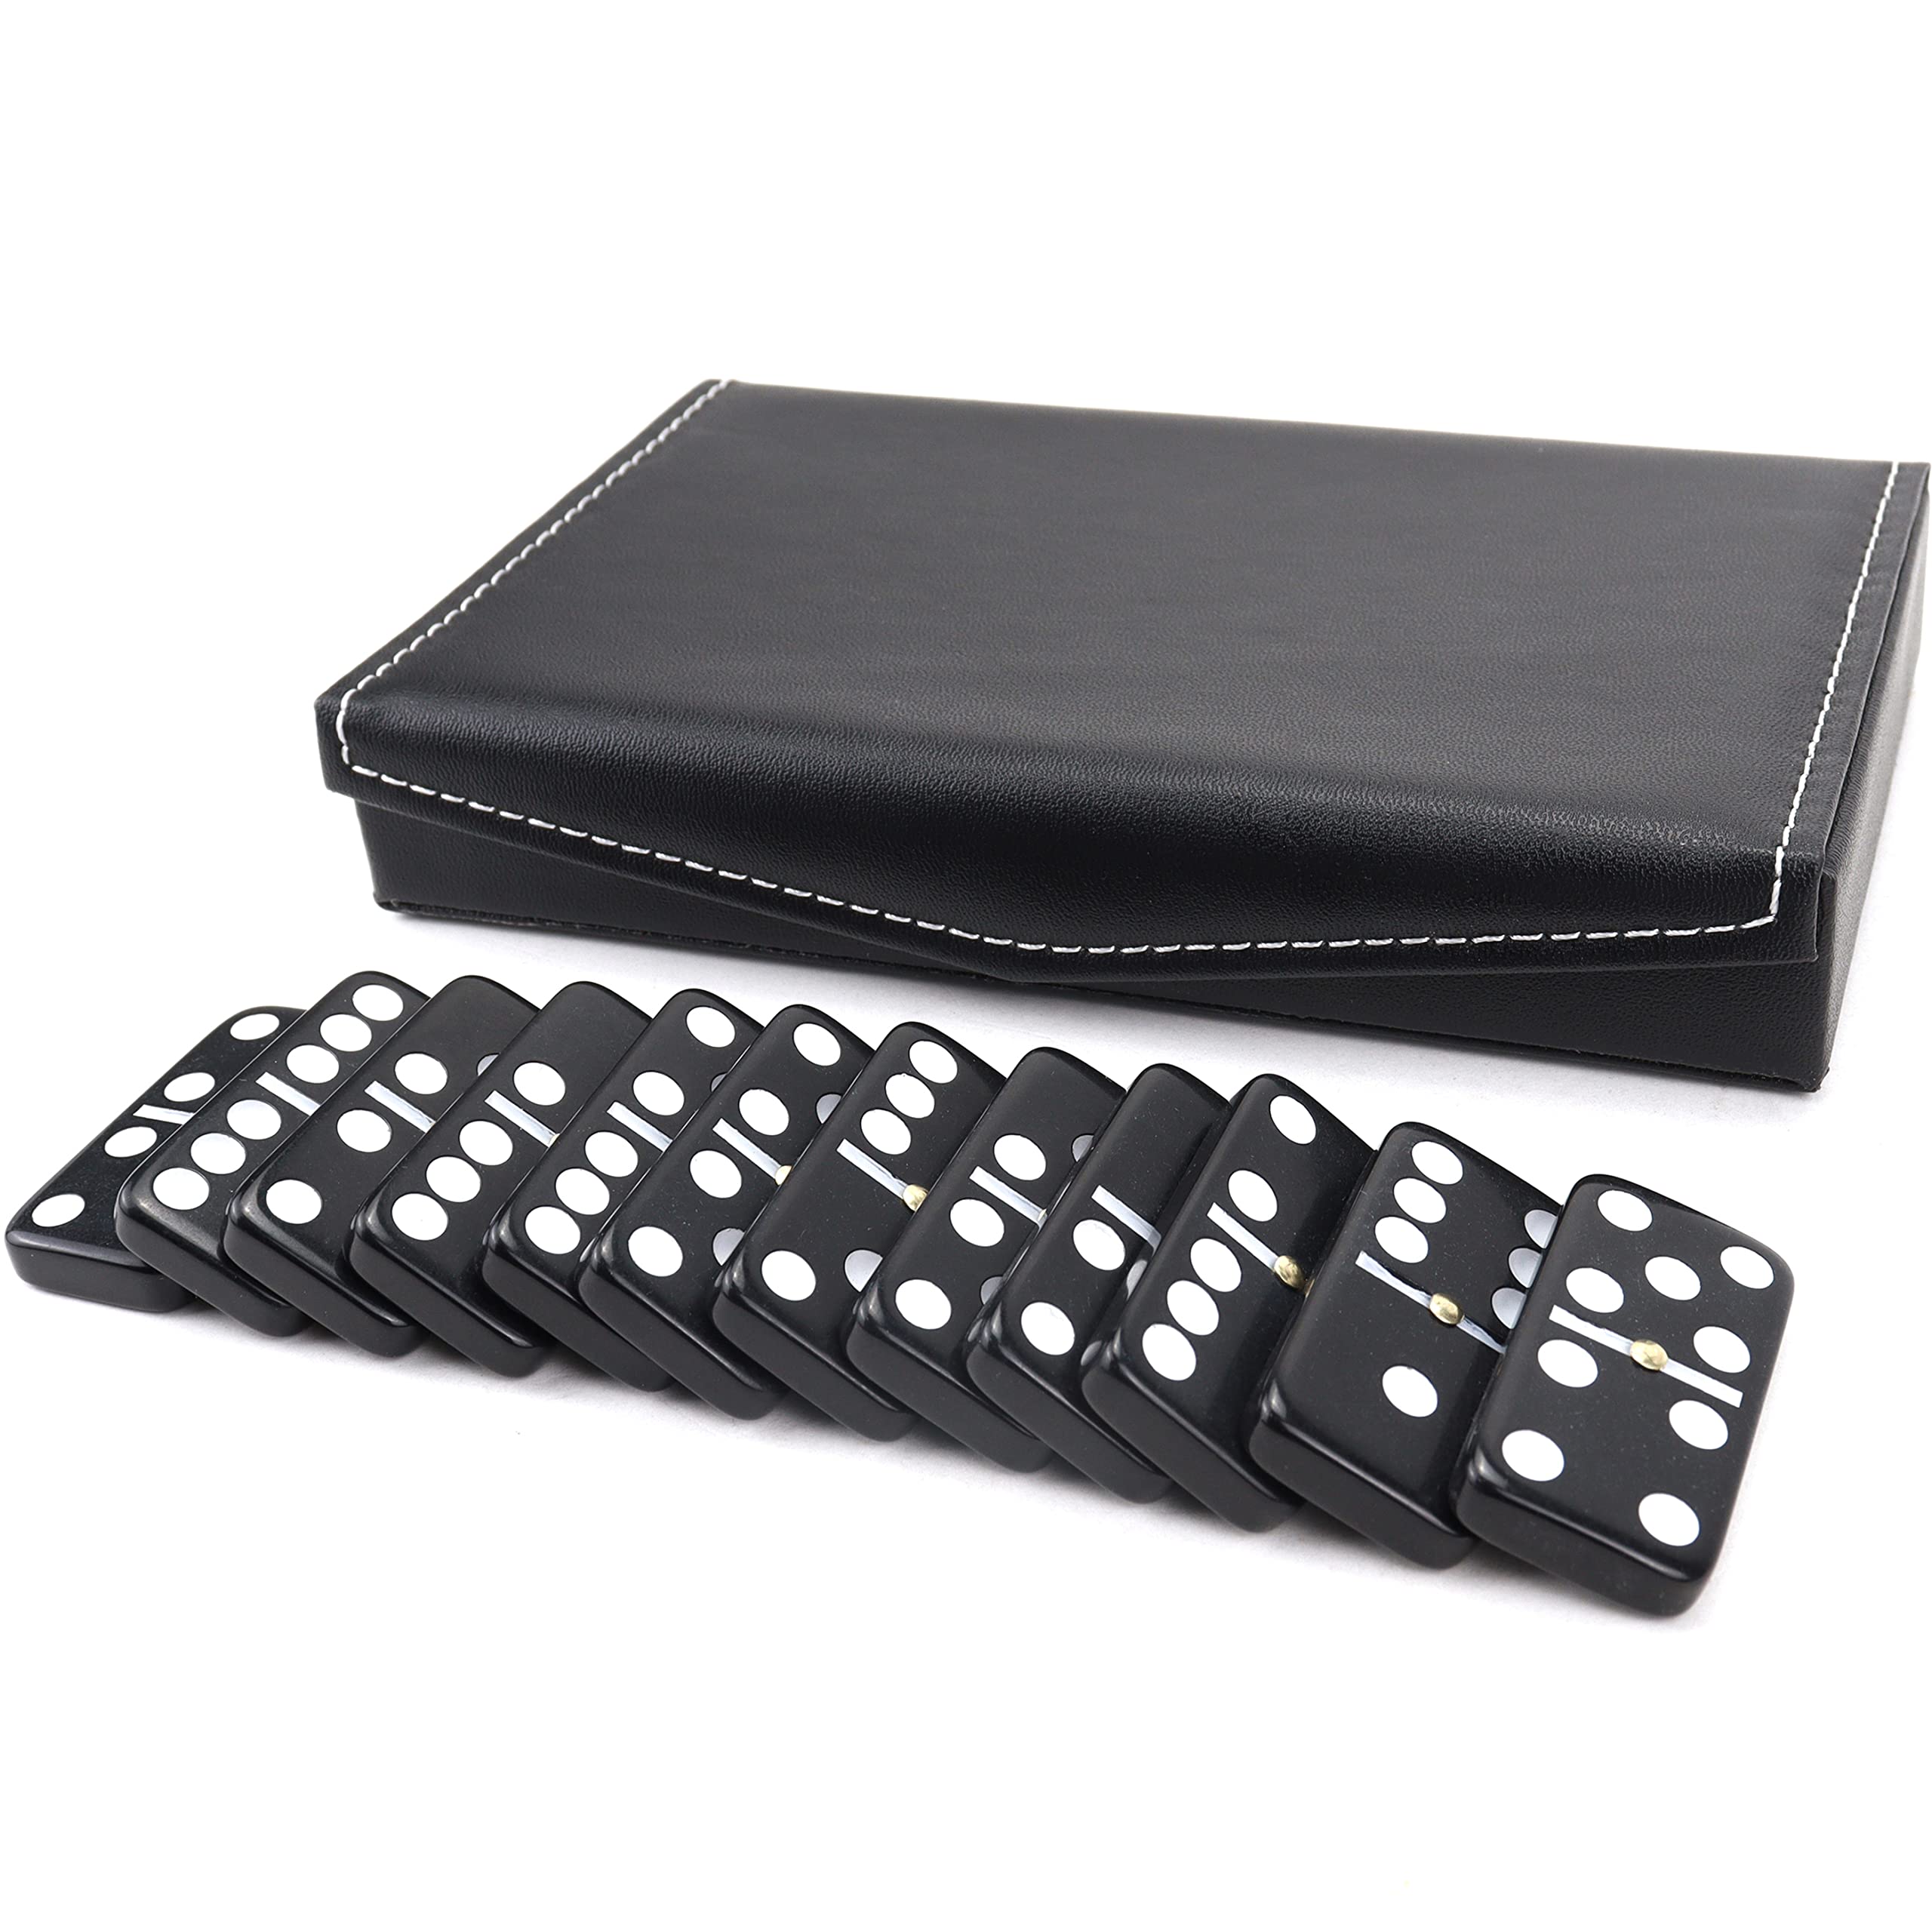 Queensell Dominoes Set for Adults - Domino Set for Classic Board Games - Dominoes Double 6 for Family Games - Double Six Standard Dominos Set 28 Tiles with Black Leather Case